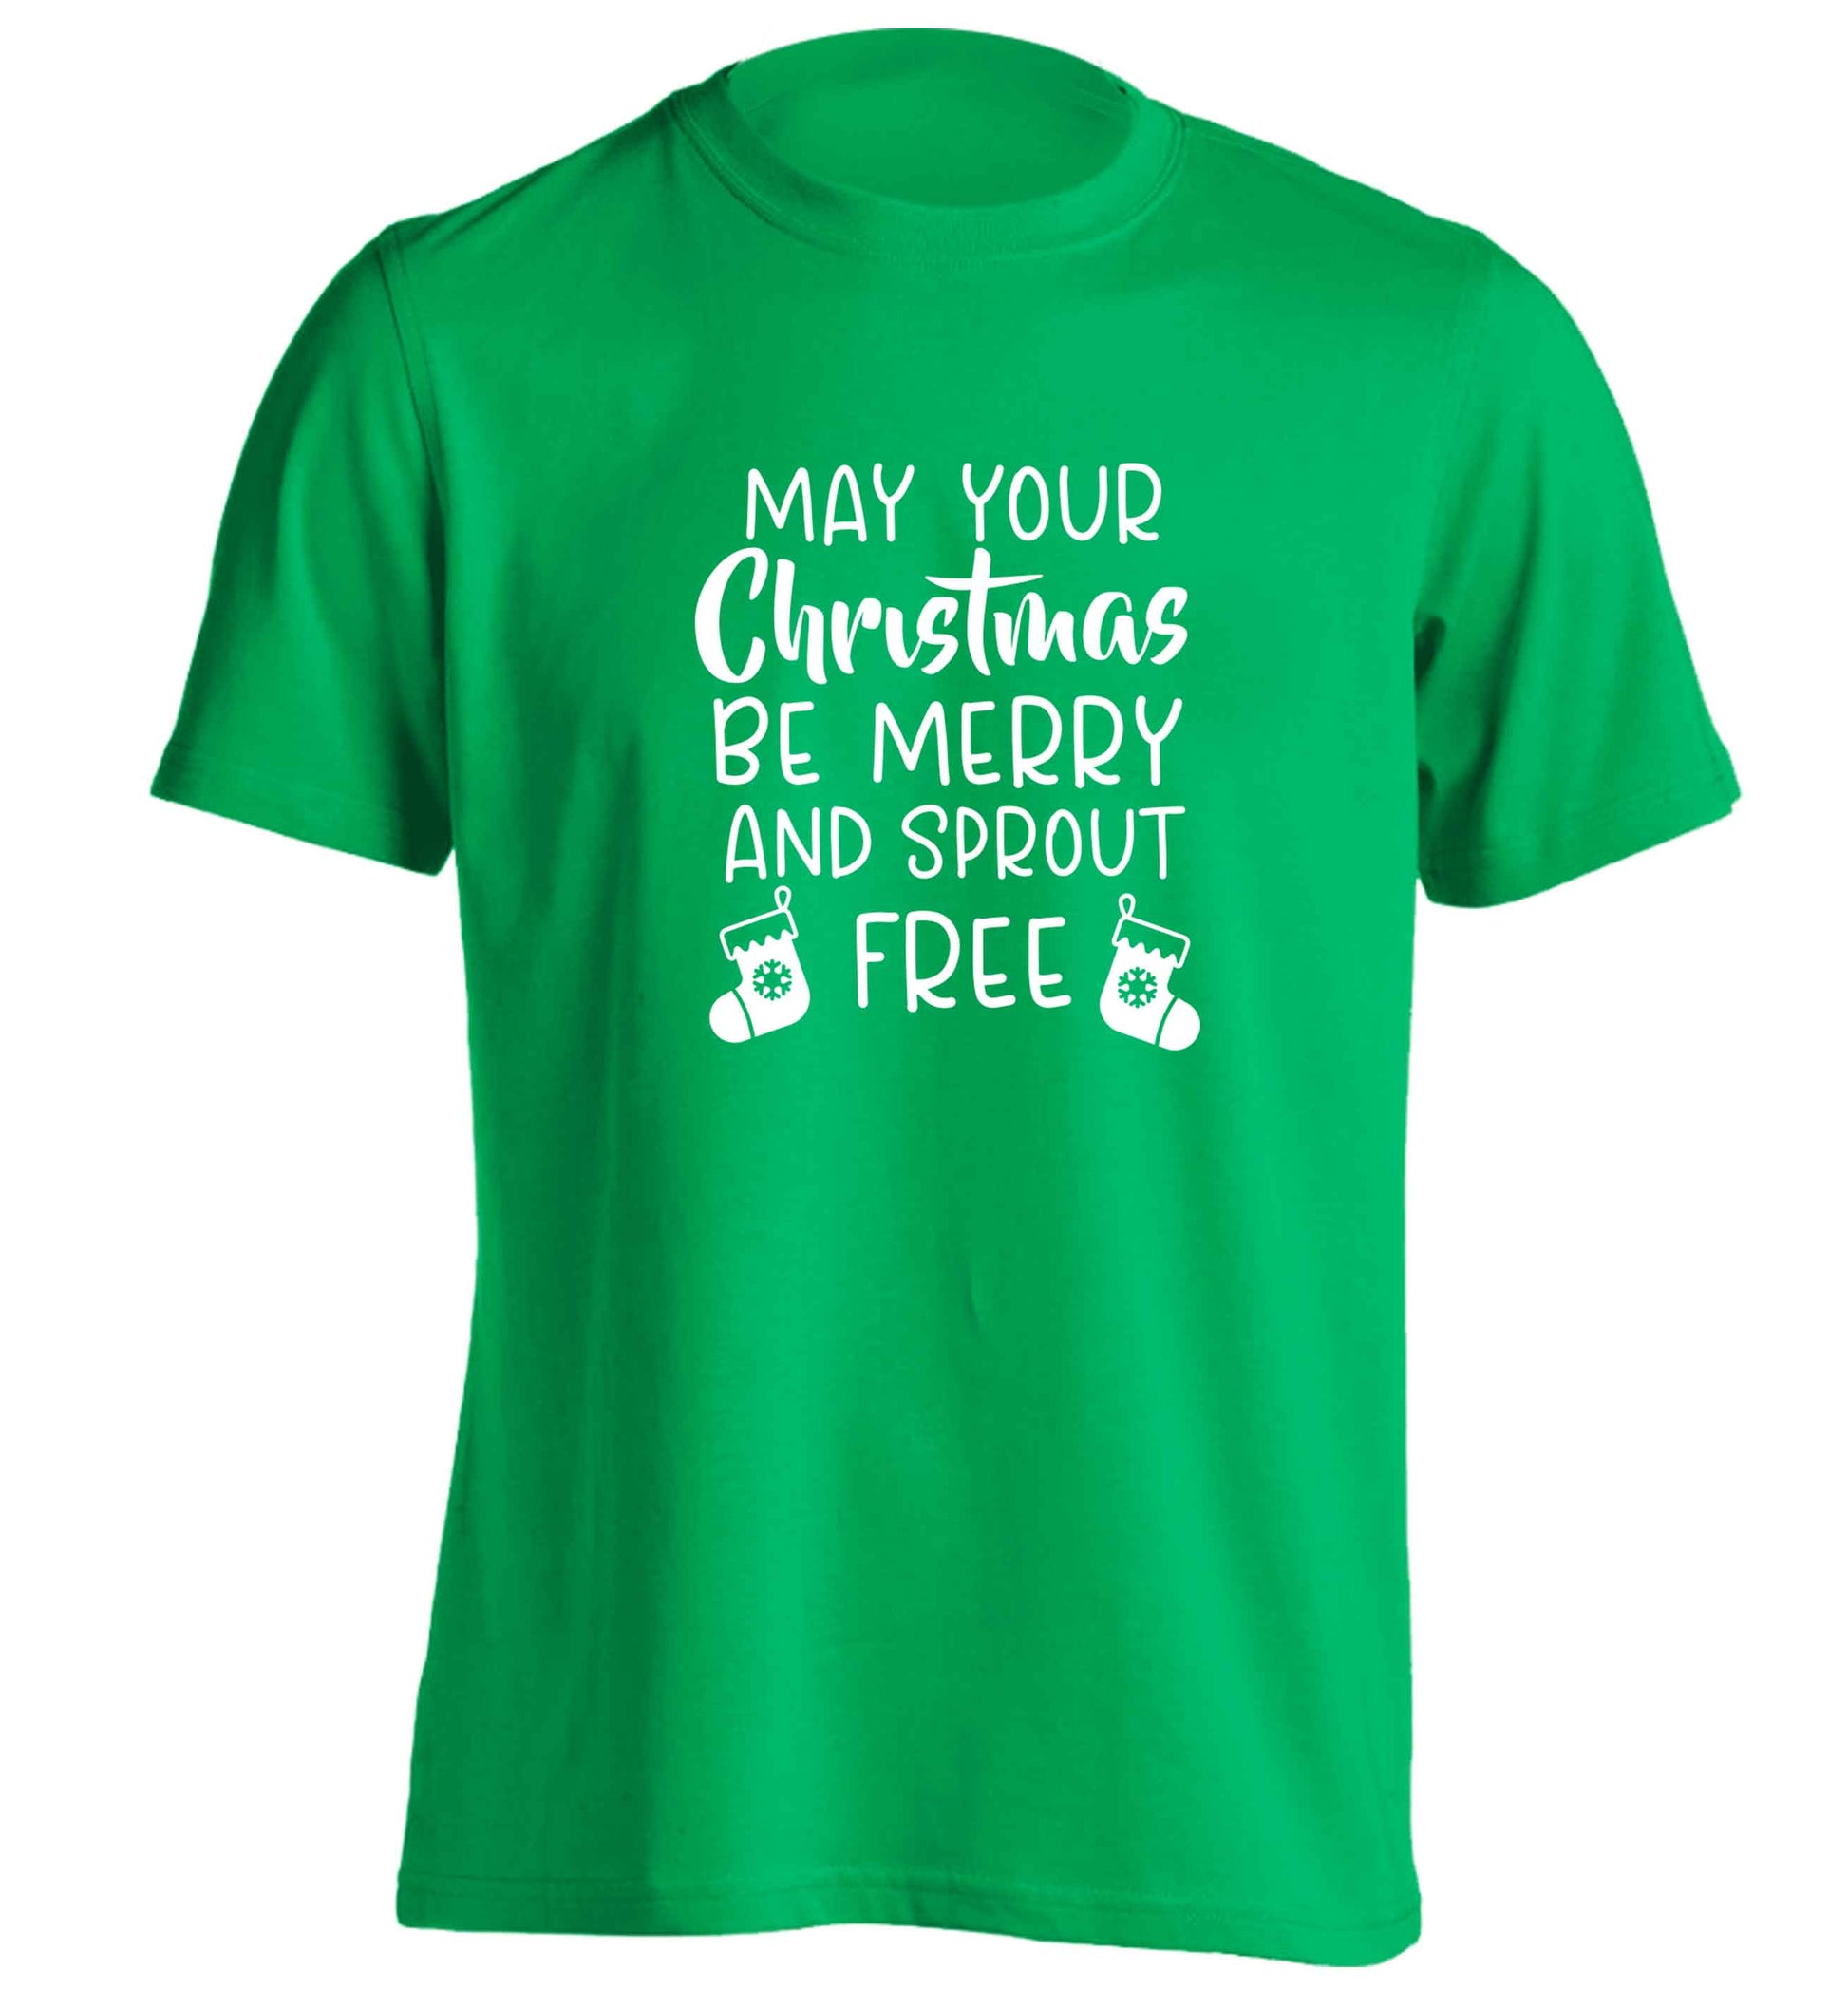 May your Christmas be merry and sprout free adults unisex green Tshirt 2XL